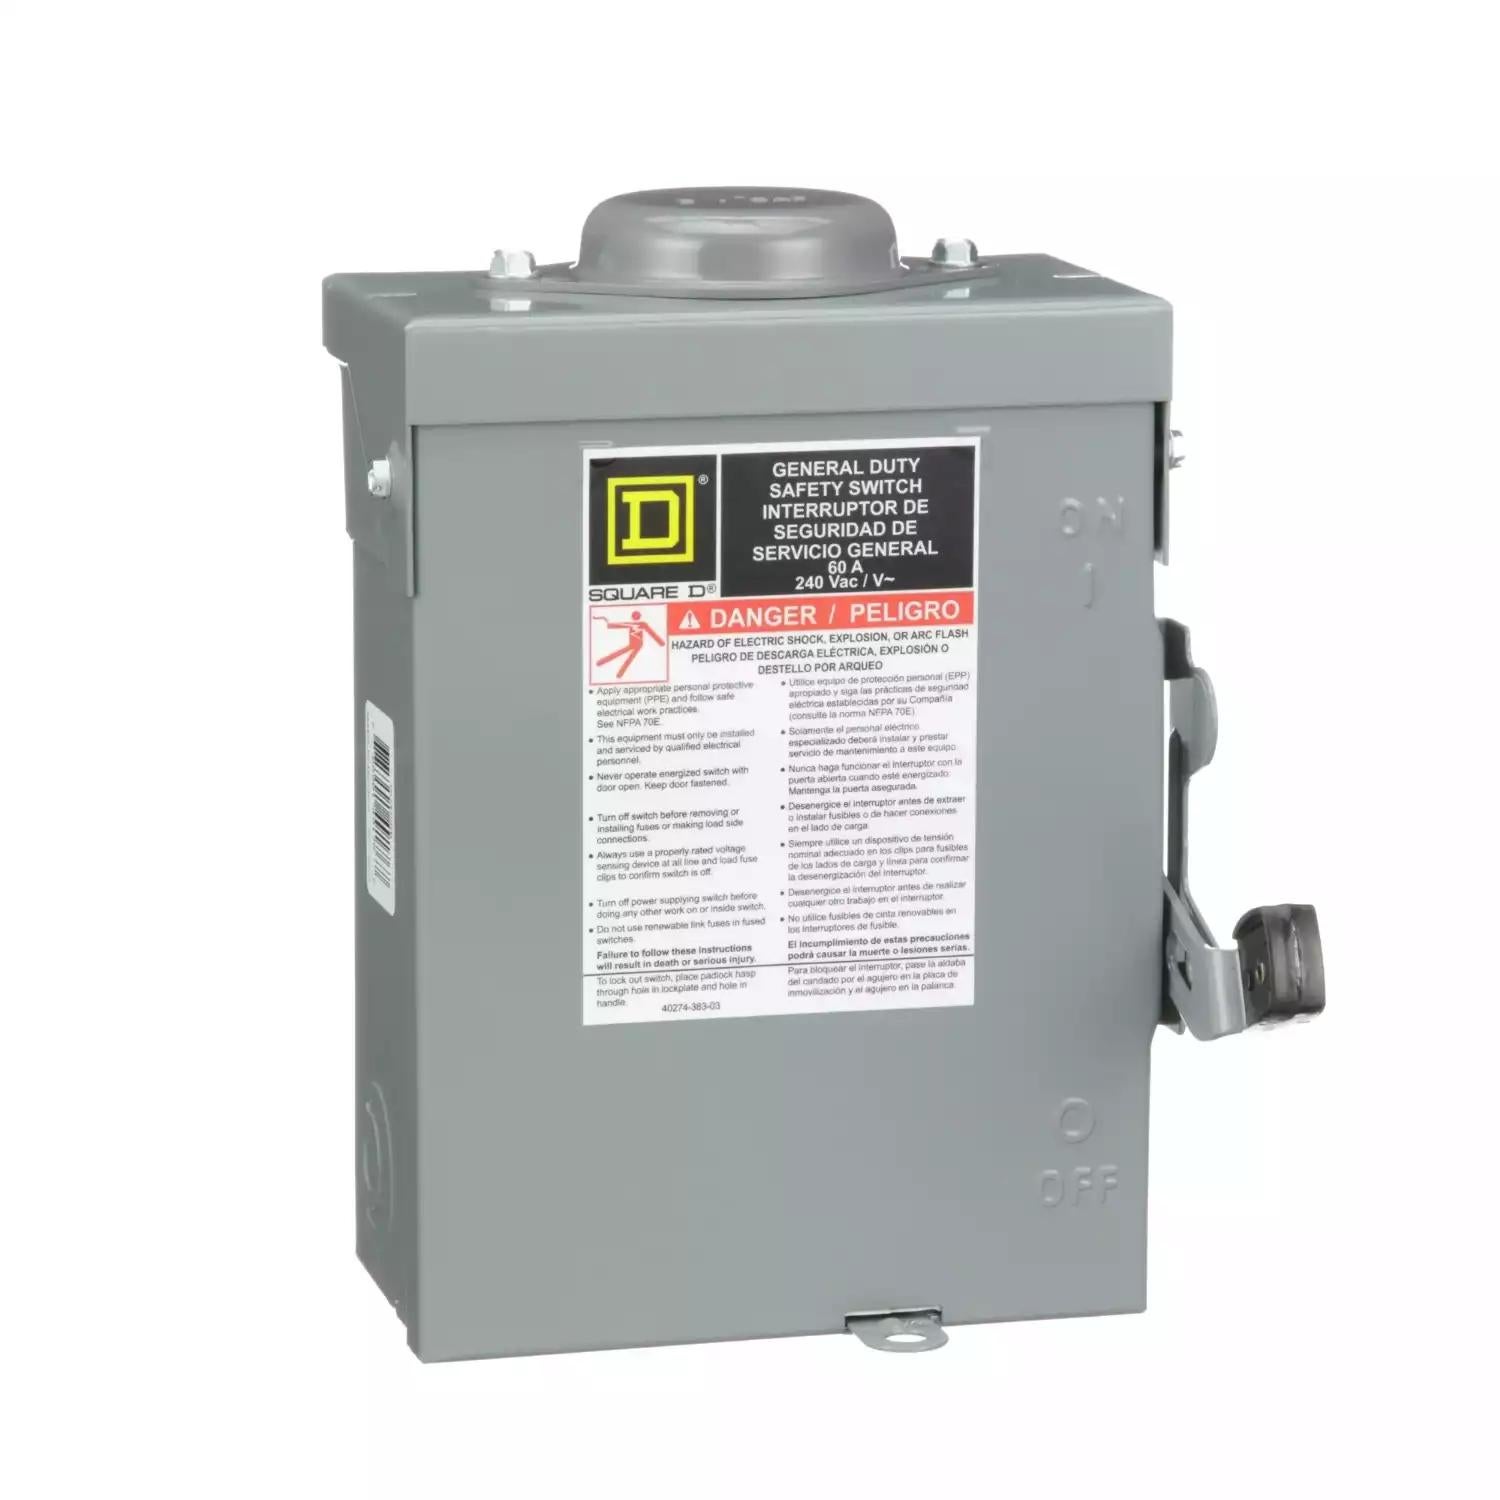 Safety switch, general duty, non fusible, 60A, 3 wire, 3 poles, 15hp, 240VAC, Type 3R, bolt on hub provision